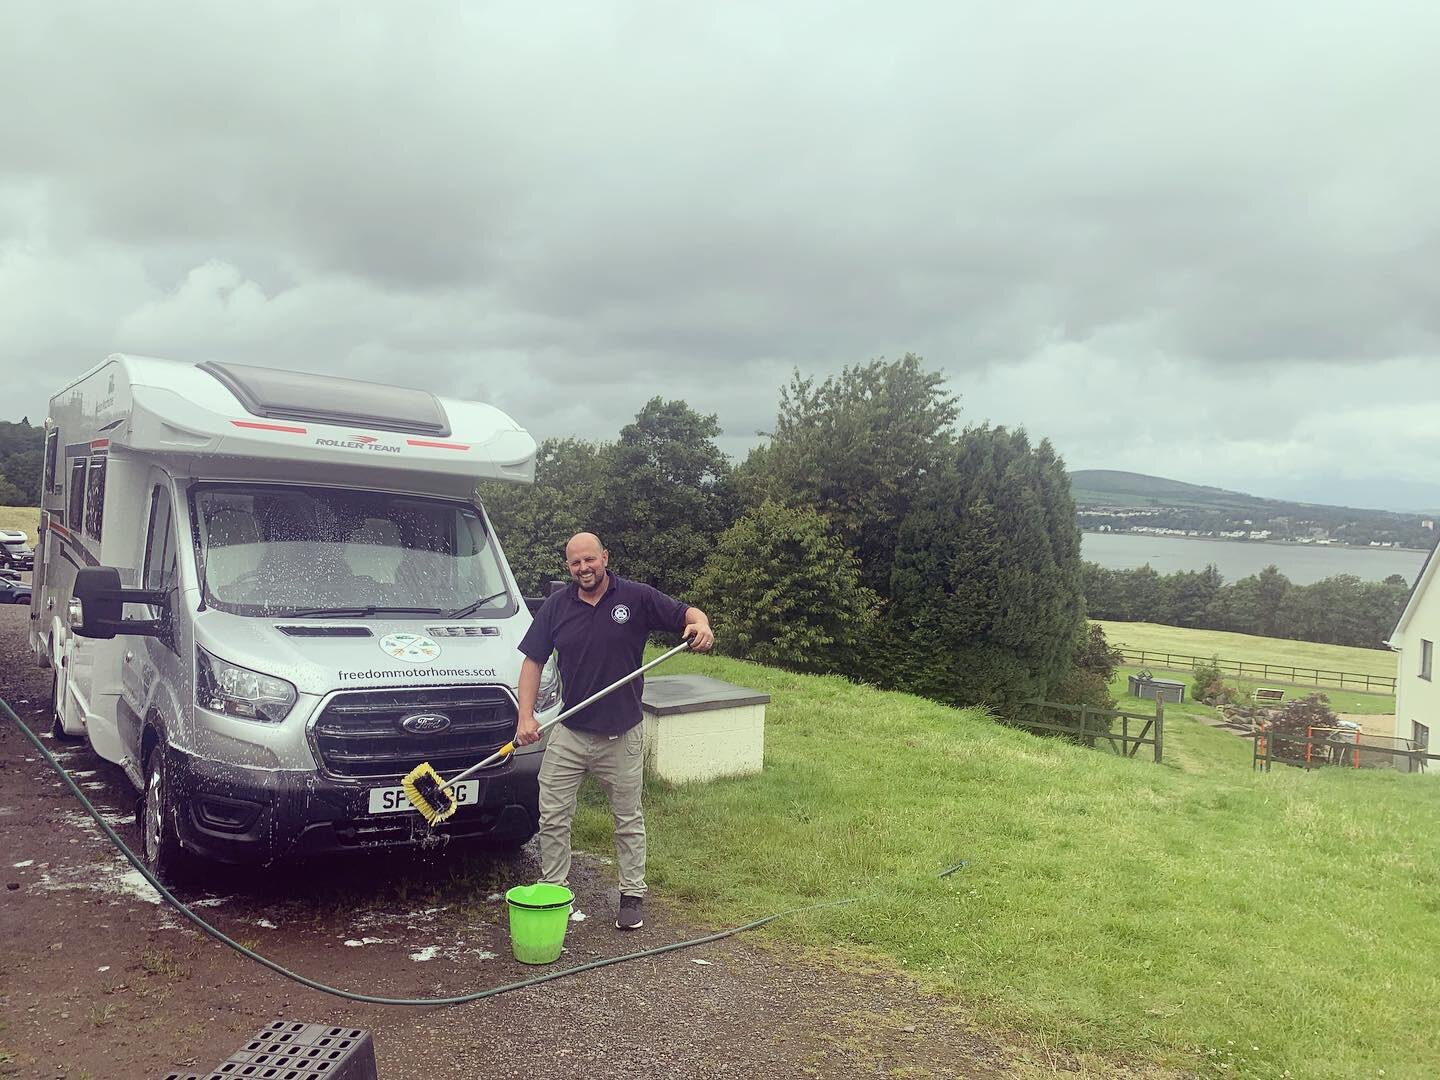 Good to see Davey scrubbing away at the vans! We do like to keep them sparkling ✨ for our customers! #freedommotorhomes